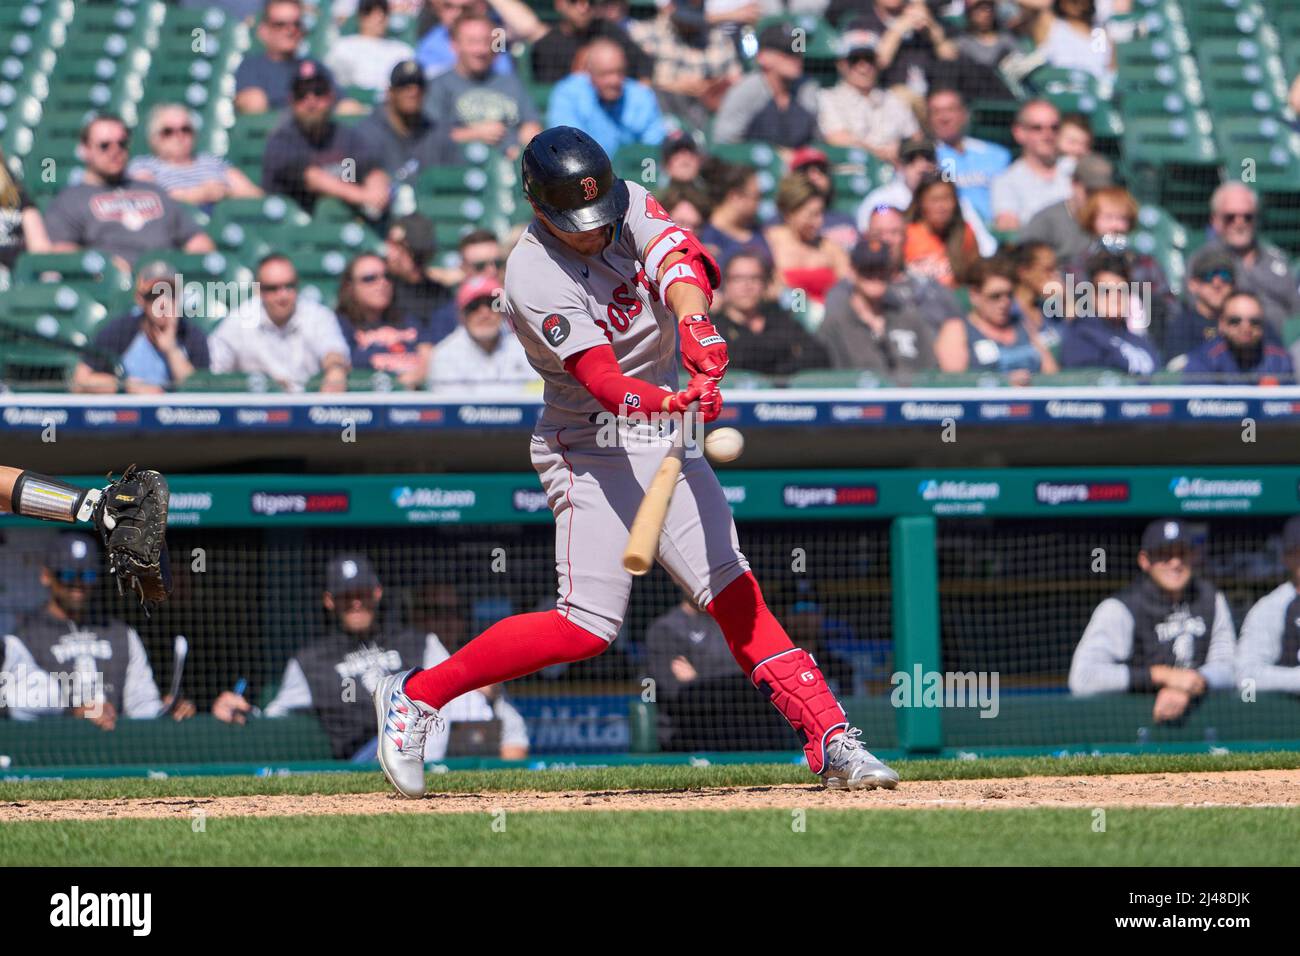 Detroit MI, USA. 12th Apr, 2022. Boston center fielder Enrique Hernandez  (5) gets a hit during the game with Boston Red Sox and Detroit Tigers held  at Comercia Park in Detroit Mi.